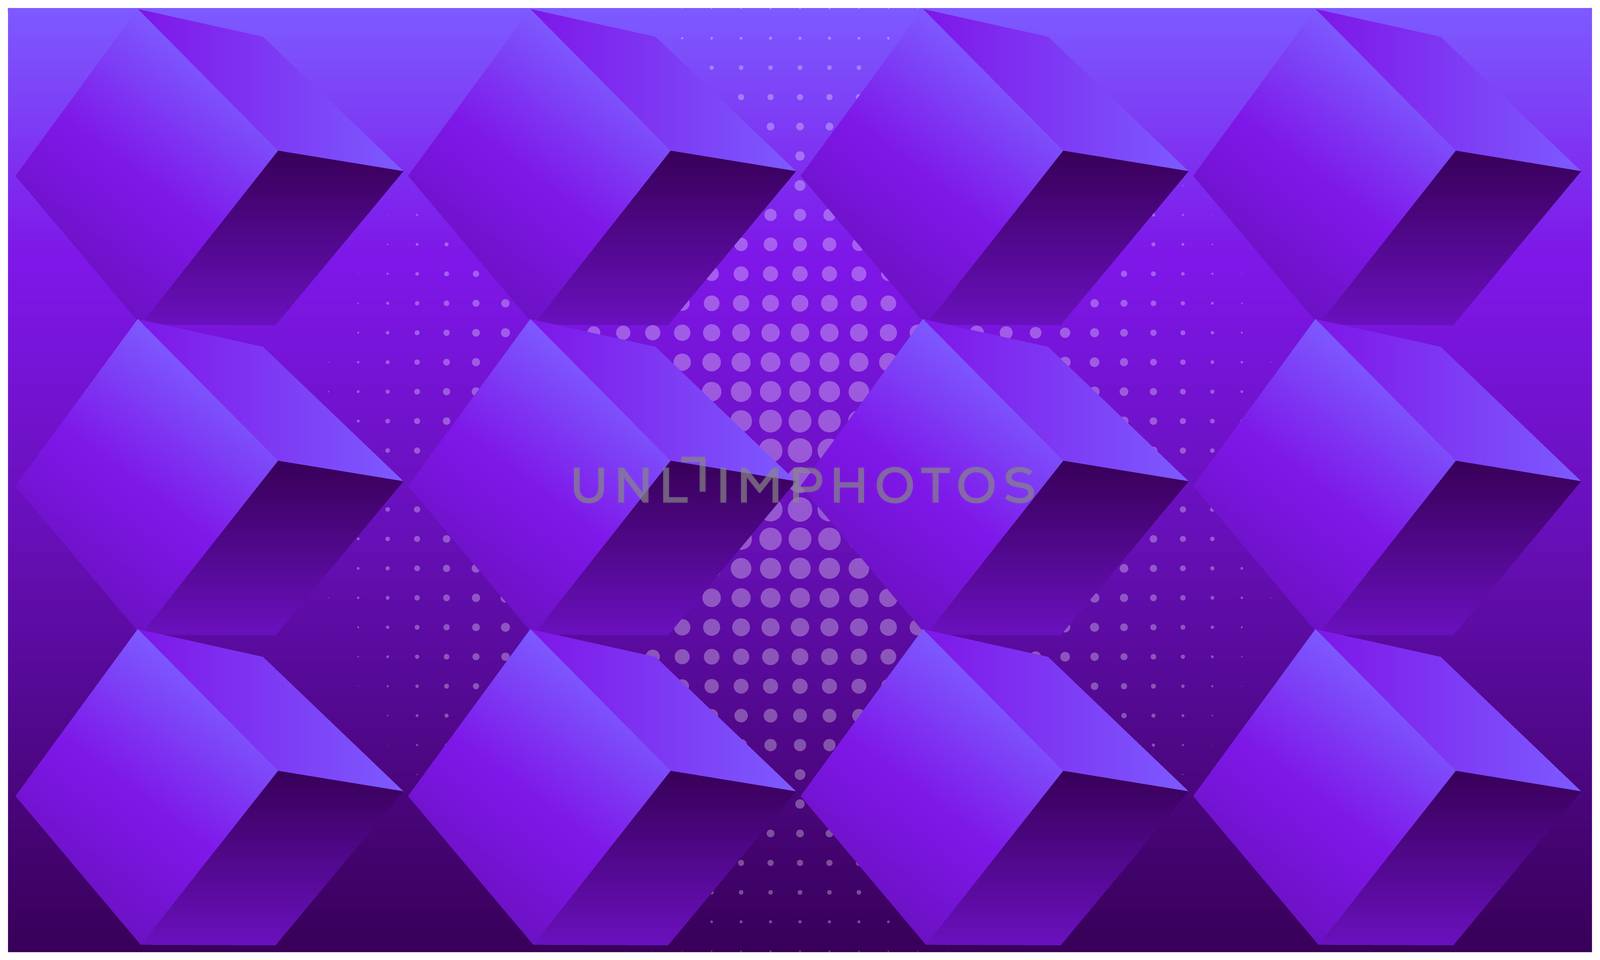 digital textile design of boxes on abstract background